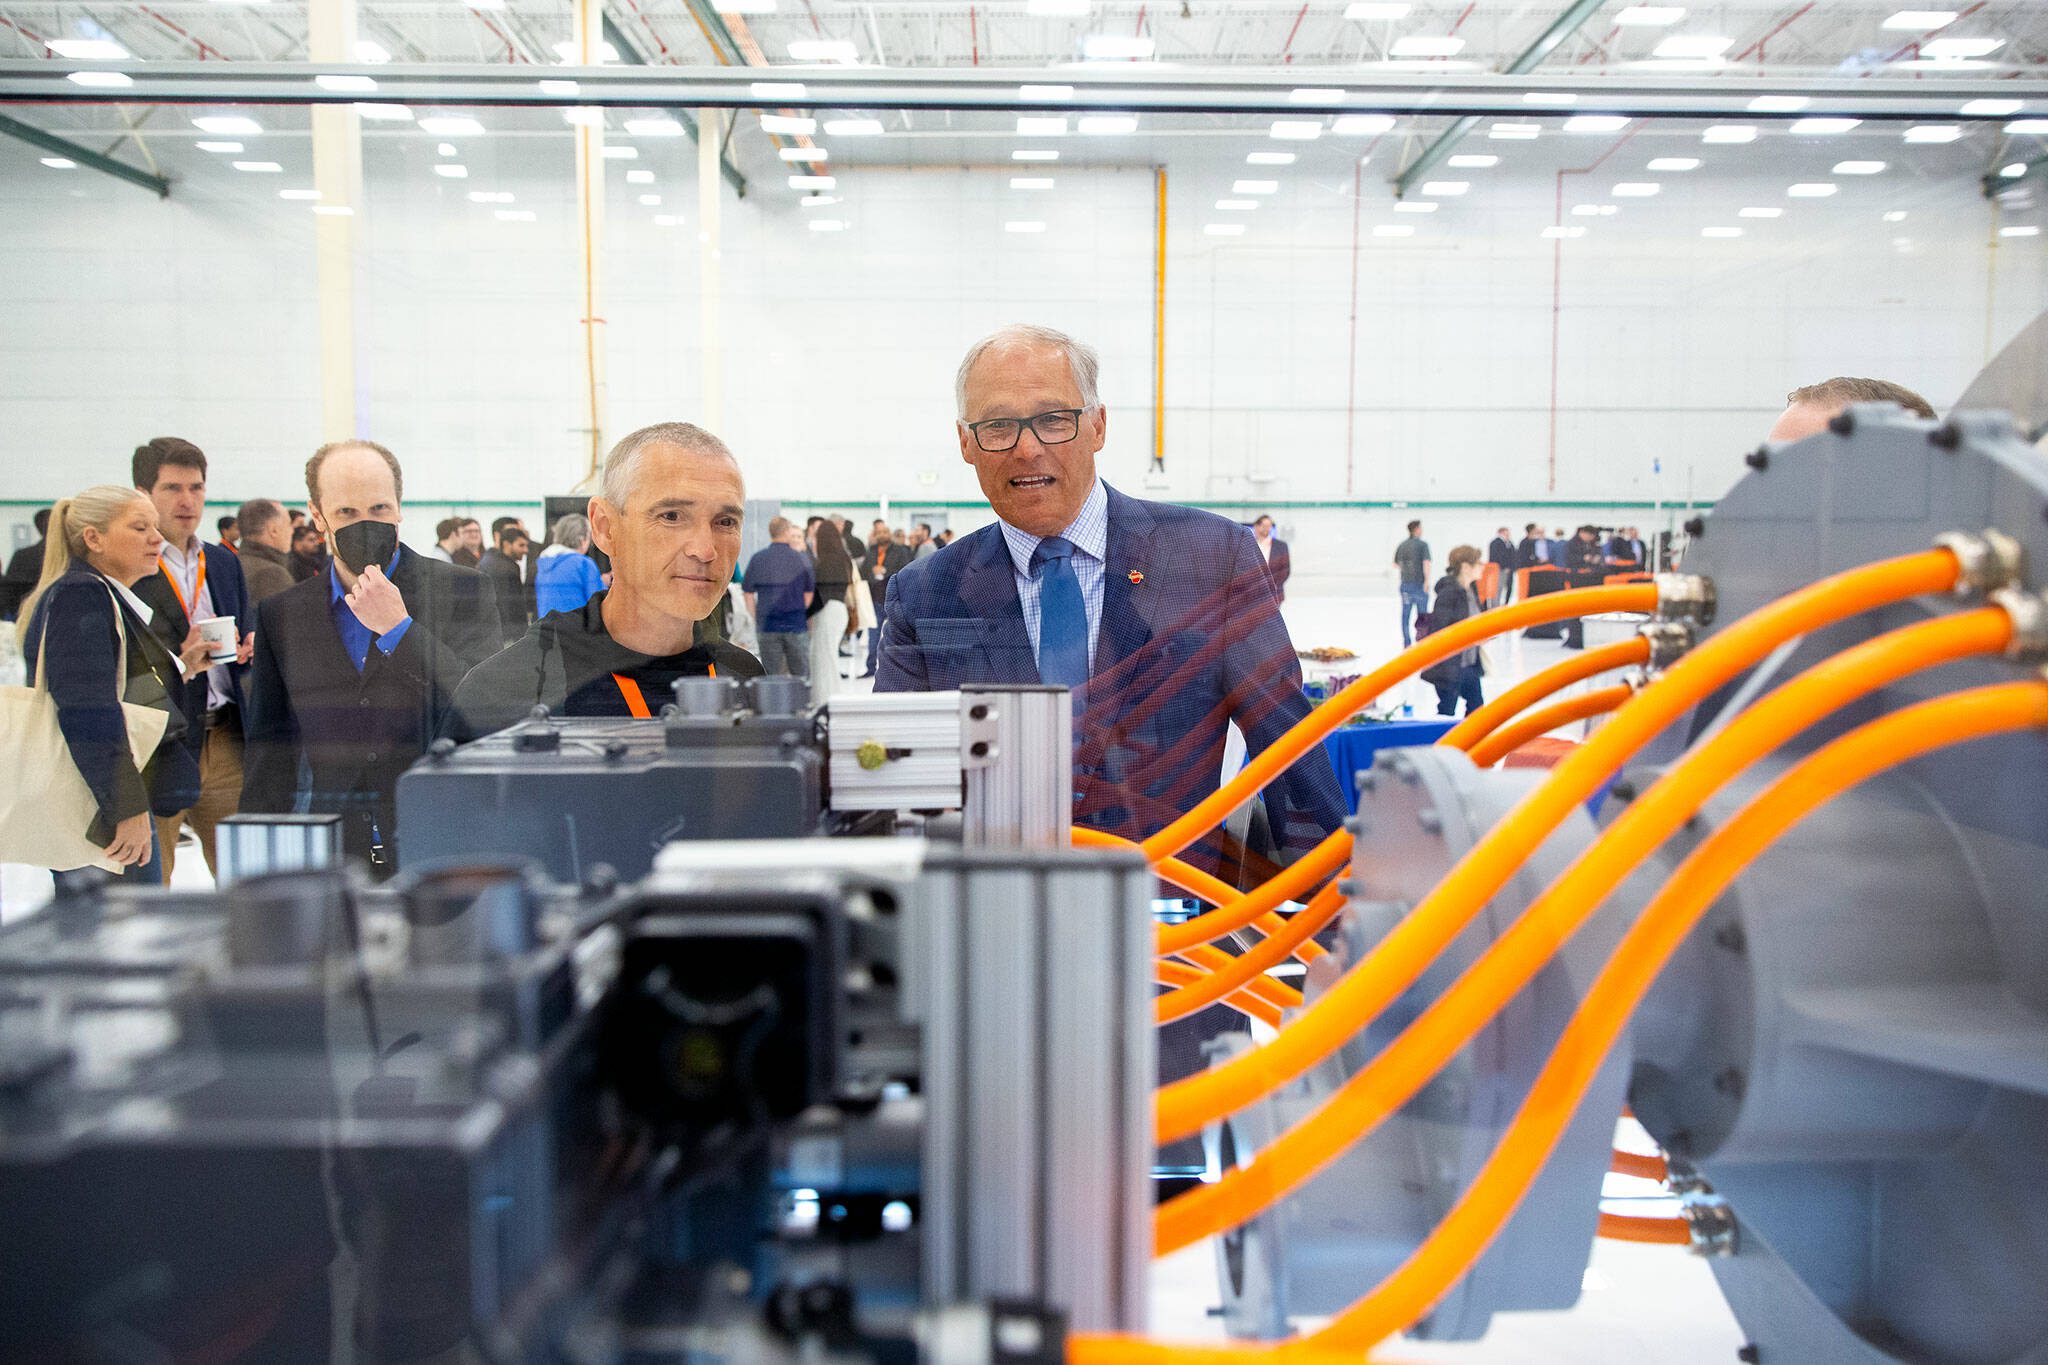 ZeroAvia founder and CEO Val Miftakhov, left, shows Gov. Jay Inslee a hydrogen-powered motor during an event at ZeroAvia’s new Everett facility on Wednesday, April 24, 2024, near Paine Field in Everett, Washington. (Ryan Berry / The Herald)